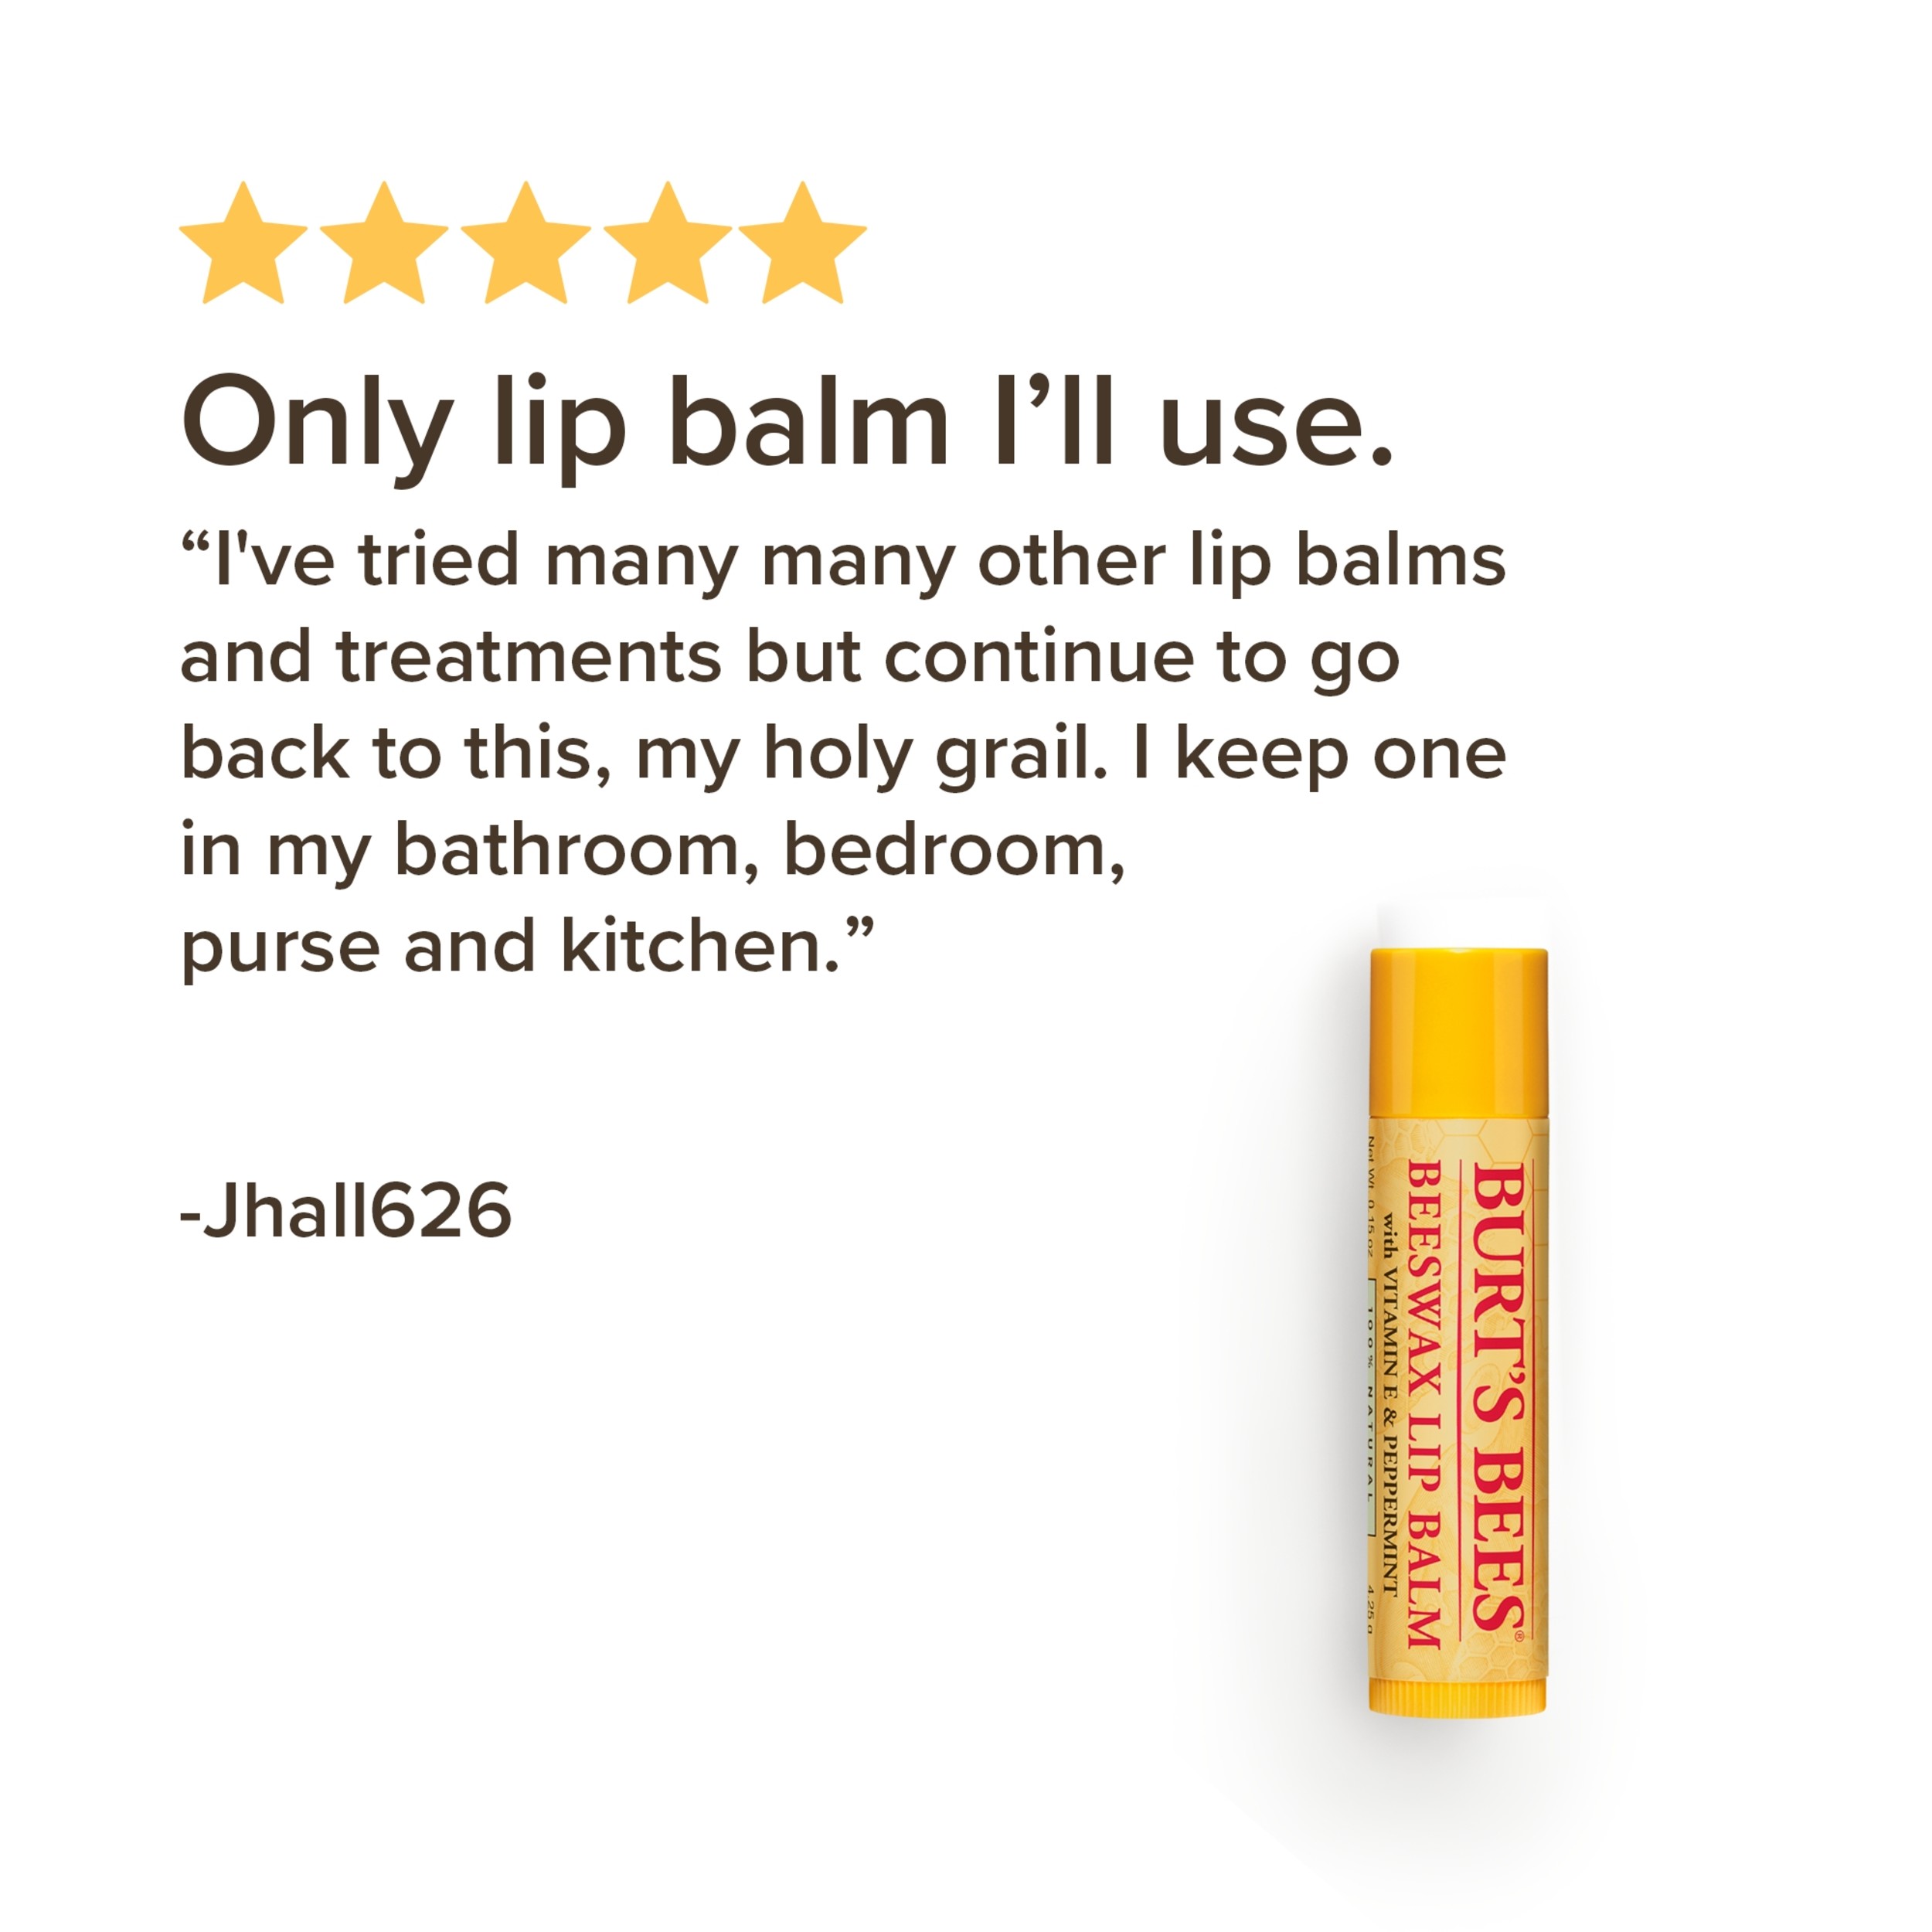 Burt's Bees 100% Natural  Moisturizing Lip Balm, with Beeswax, Vitamin E & Peppermint Oil, 1 Tube - image 4 of 12